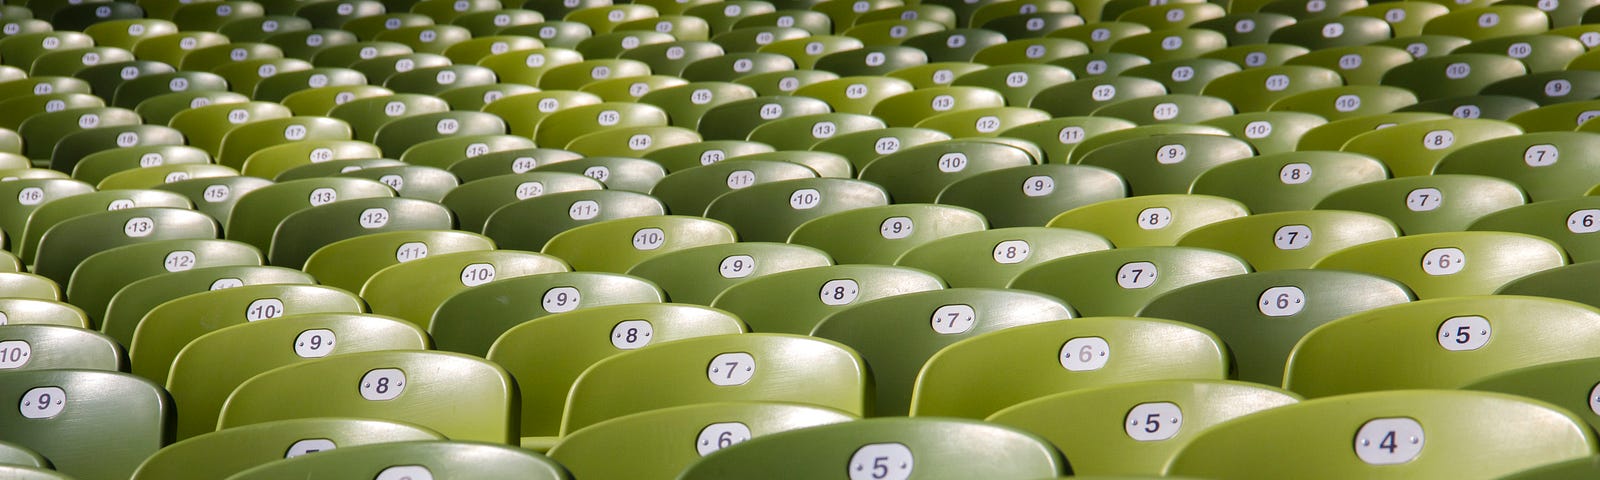 Rows of bright green auditorium seats with numbers on the back.